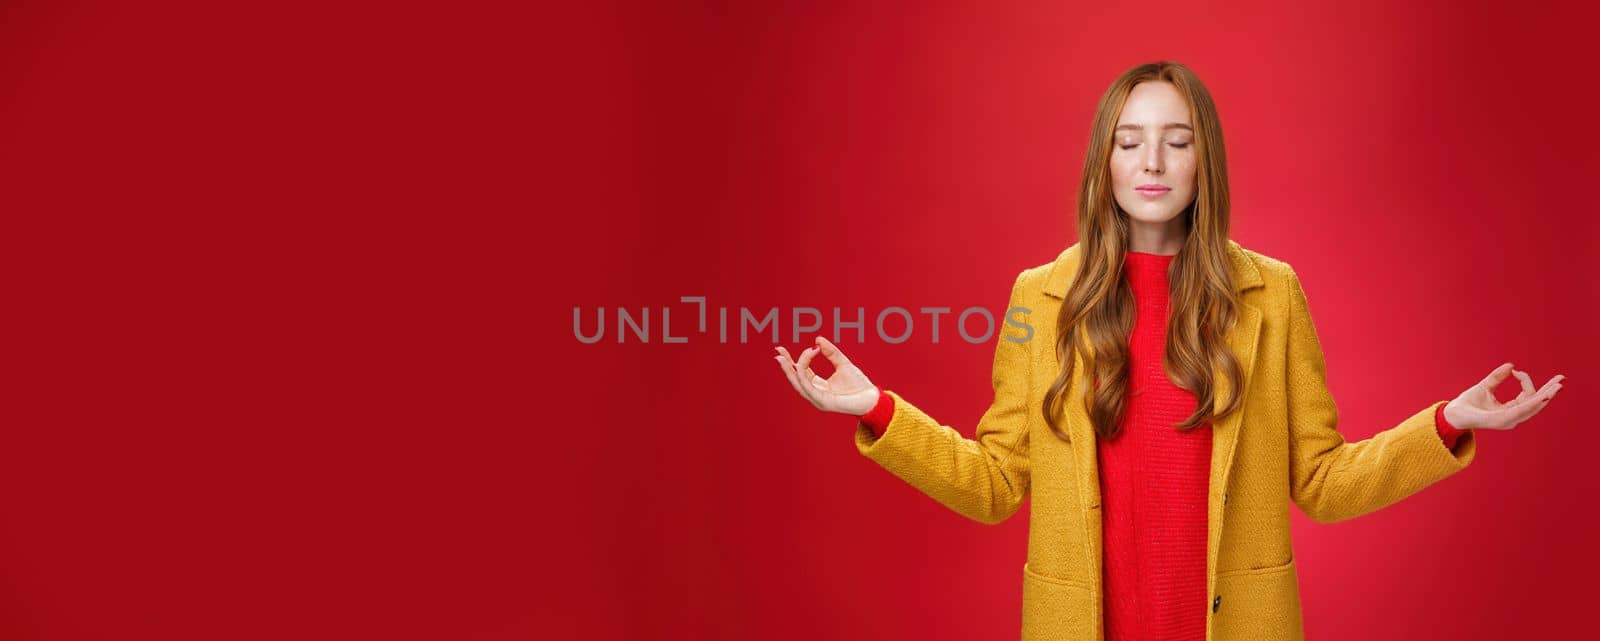 Girl keep calm releasing stress with meditation, posing in yellow coat, close eyes and looking relieved as extending hands sideways with mudra gesture, doing yoga against red background in lotus pose.